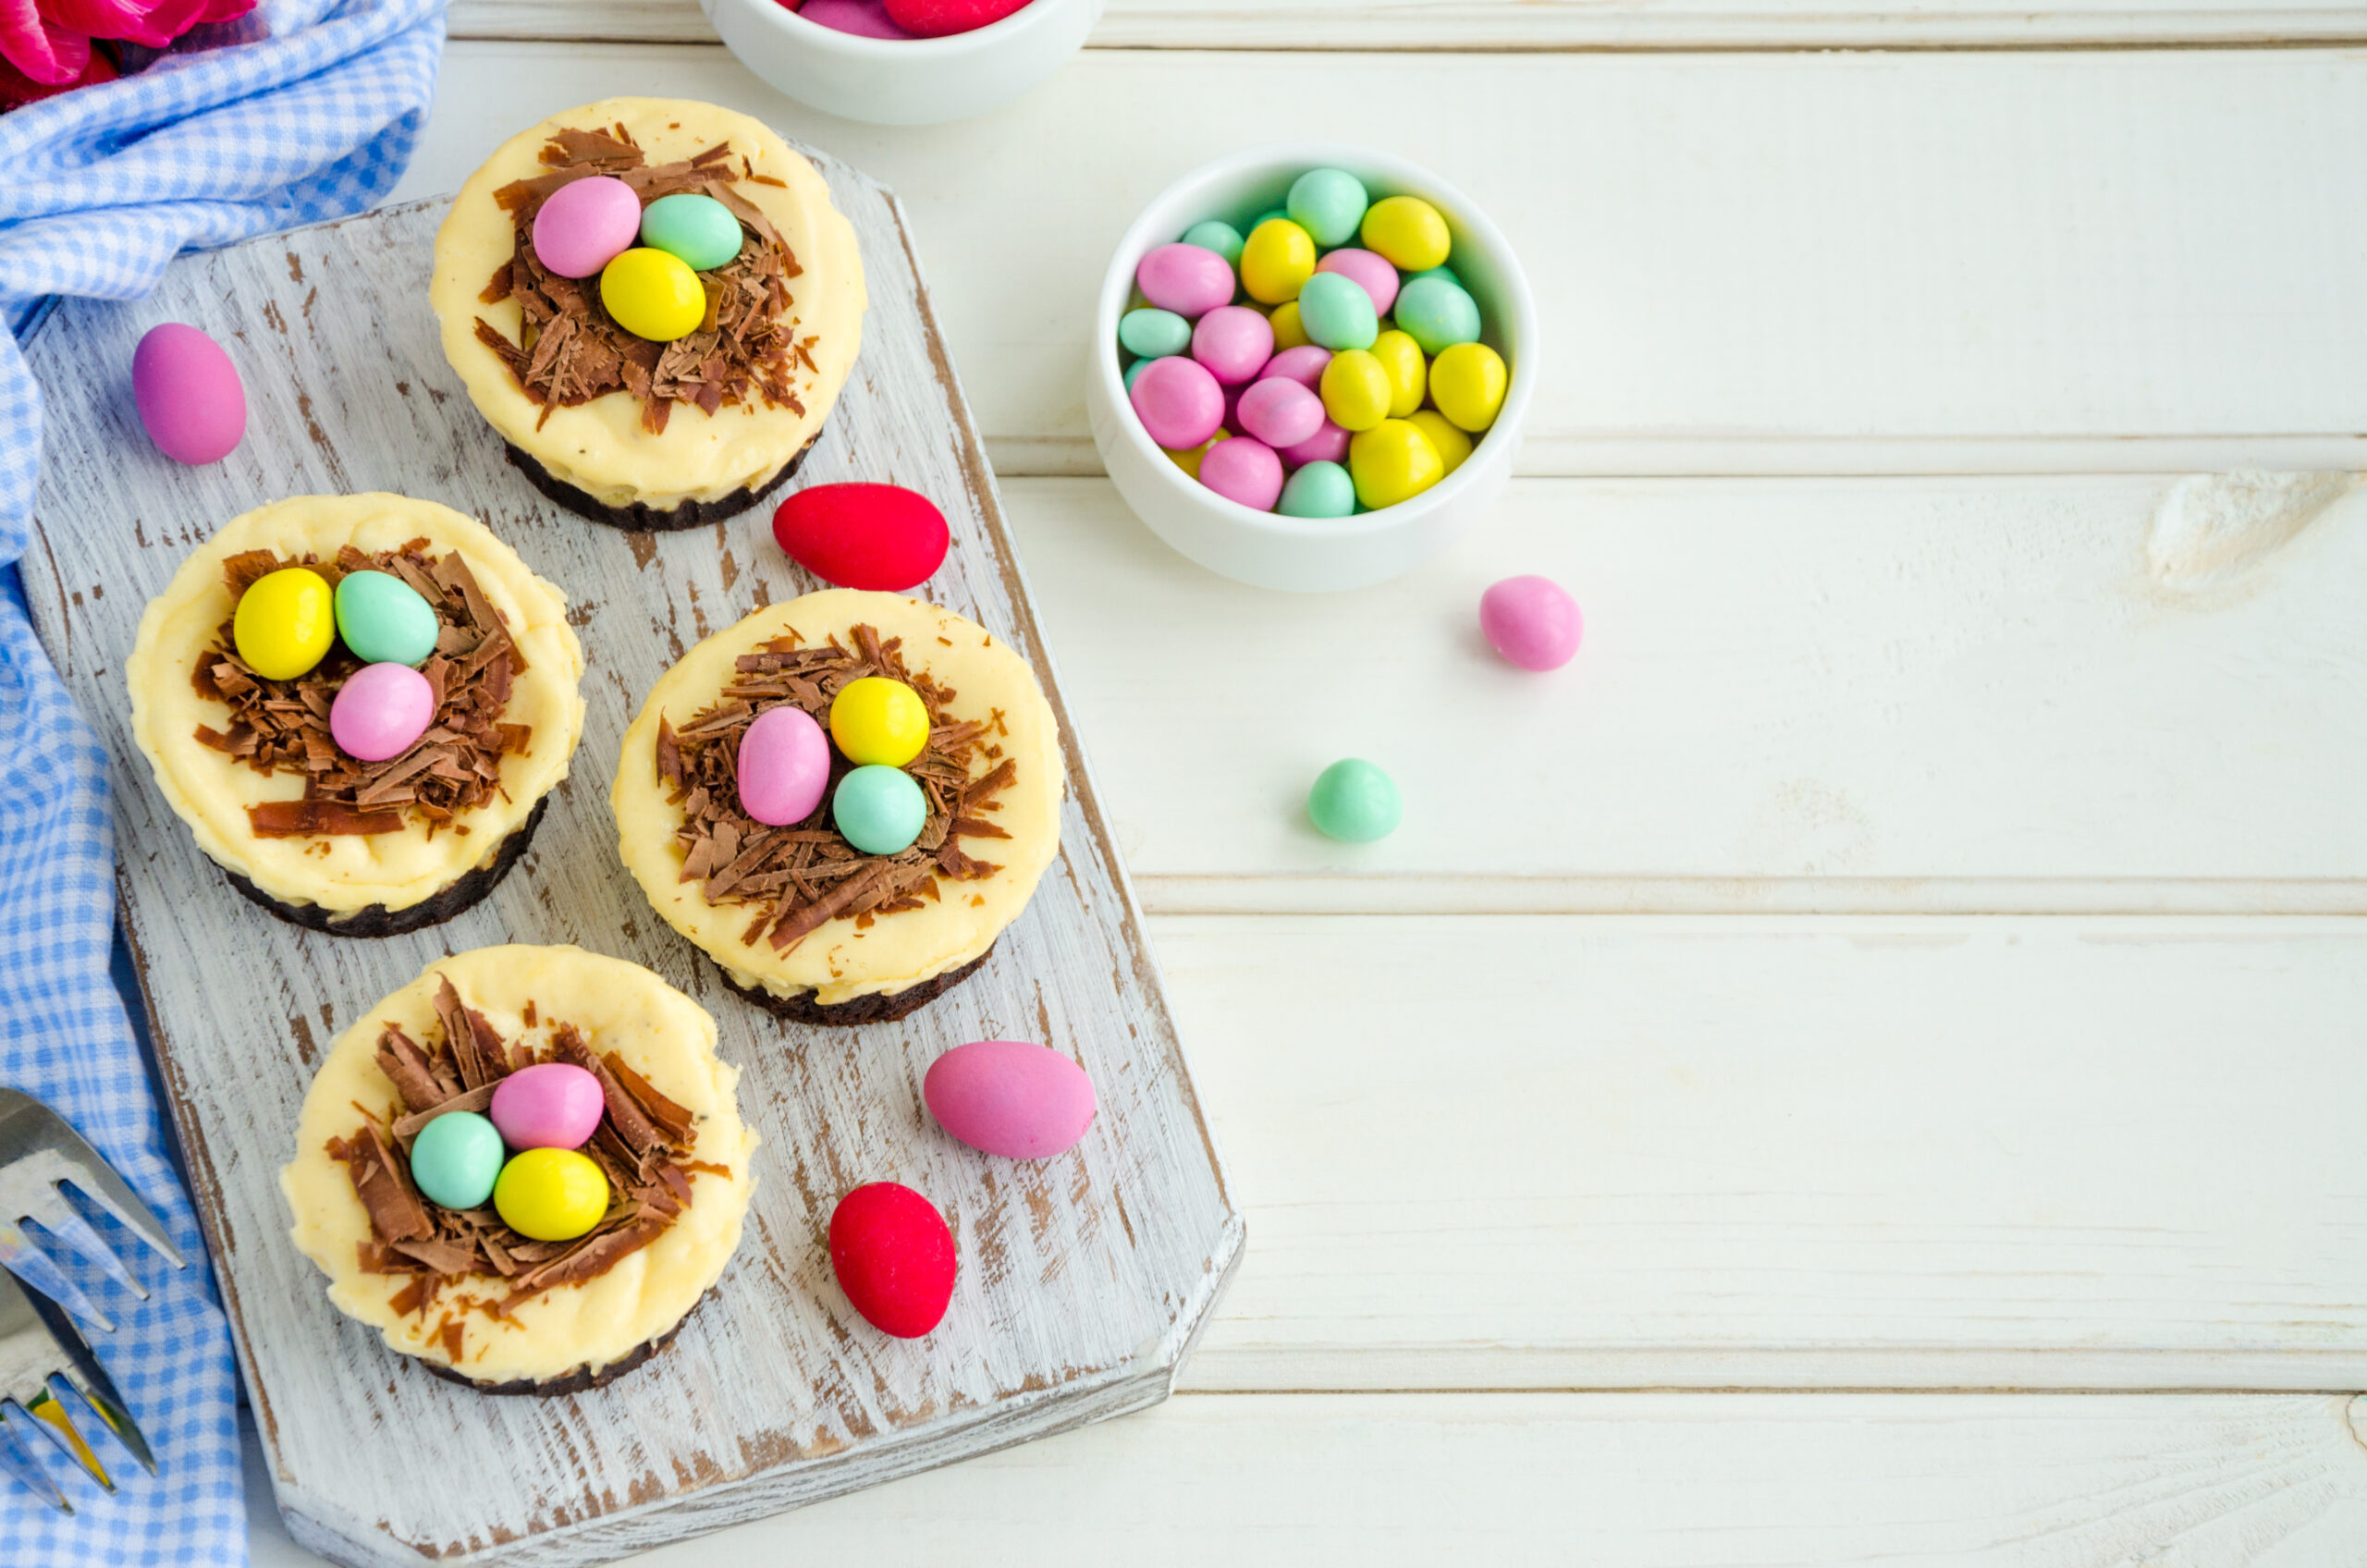 Easter Brownie Cheesecake Birds Nests; brownie crust, creamy cheesecake filling topped with mini eggs for a delicious Easter dessert recipe! Easter mini brownie cheesecake Bird's Nest with chocolate and candy eggs. Easter dessert. Funny food idea for children.